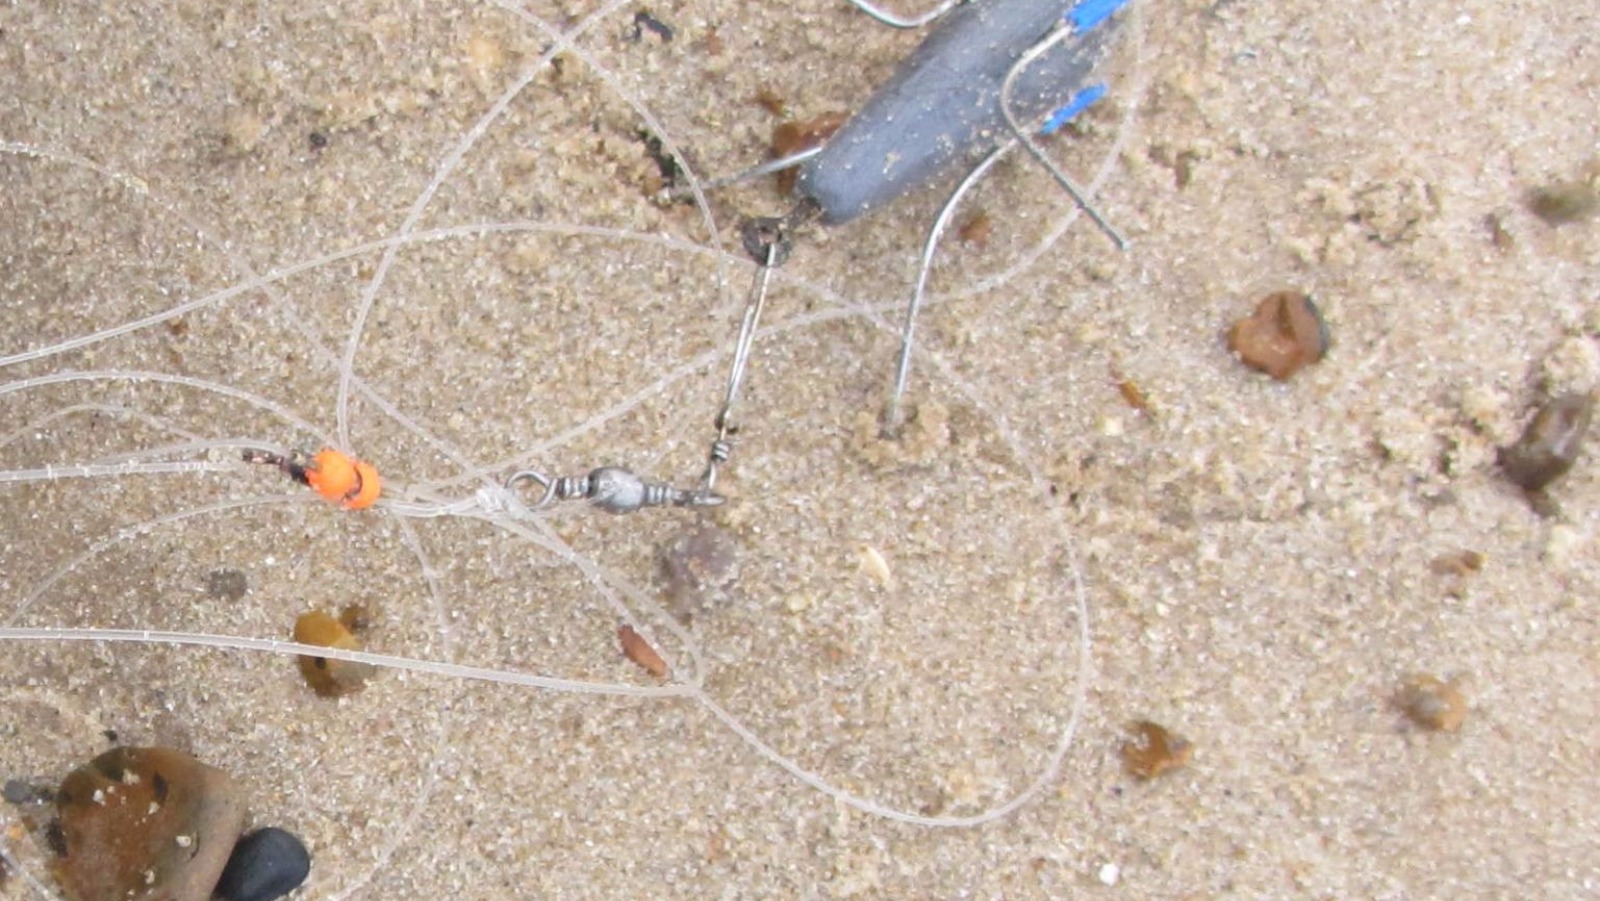 Campaign launched to clean up fishing litter from East Anglia's beaches